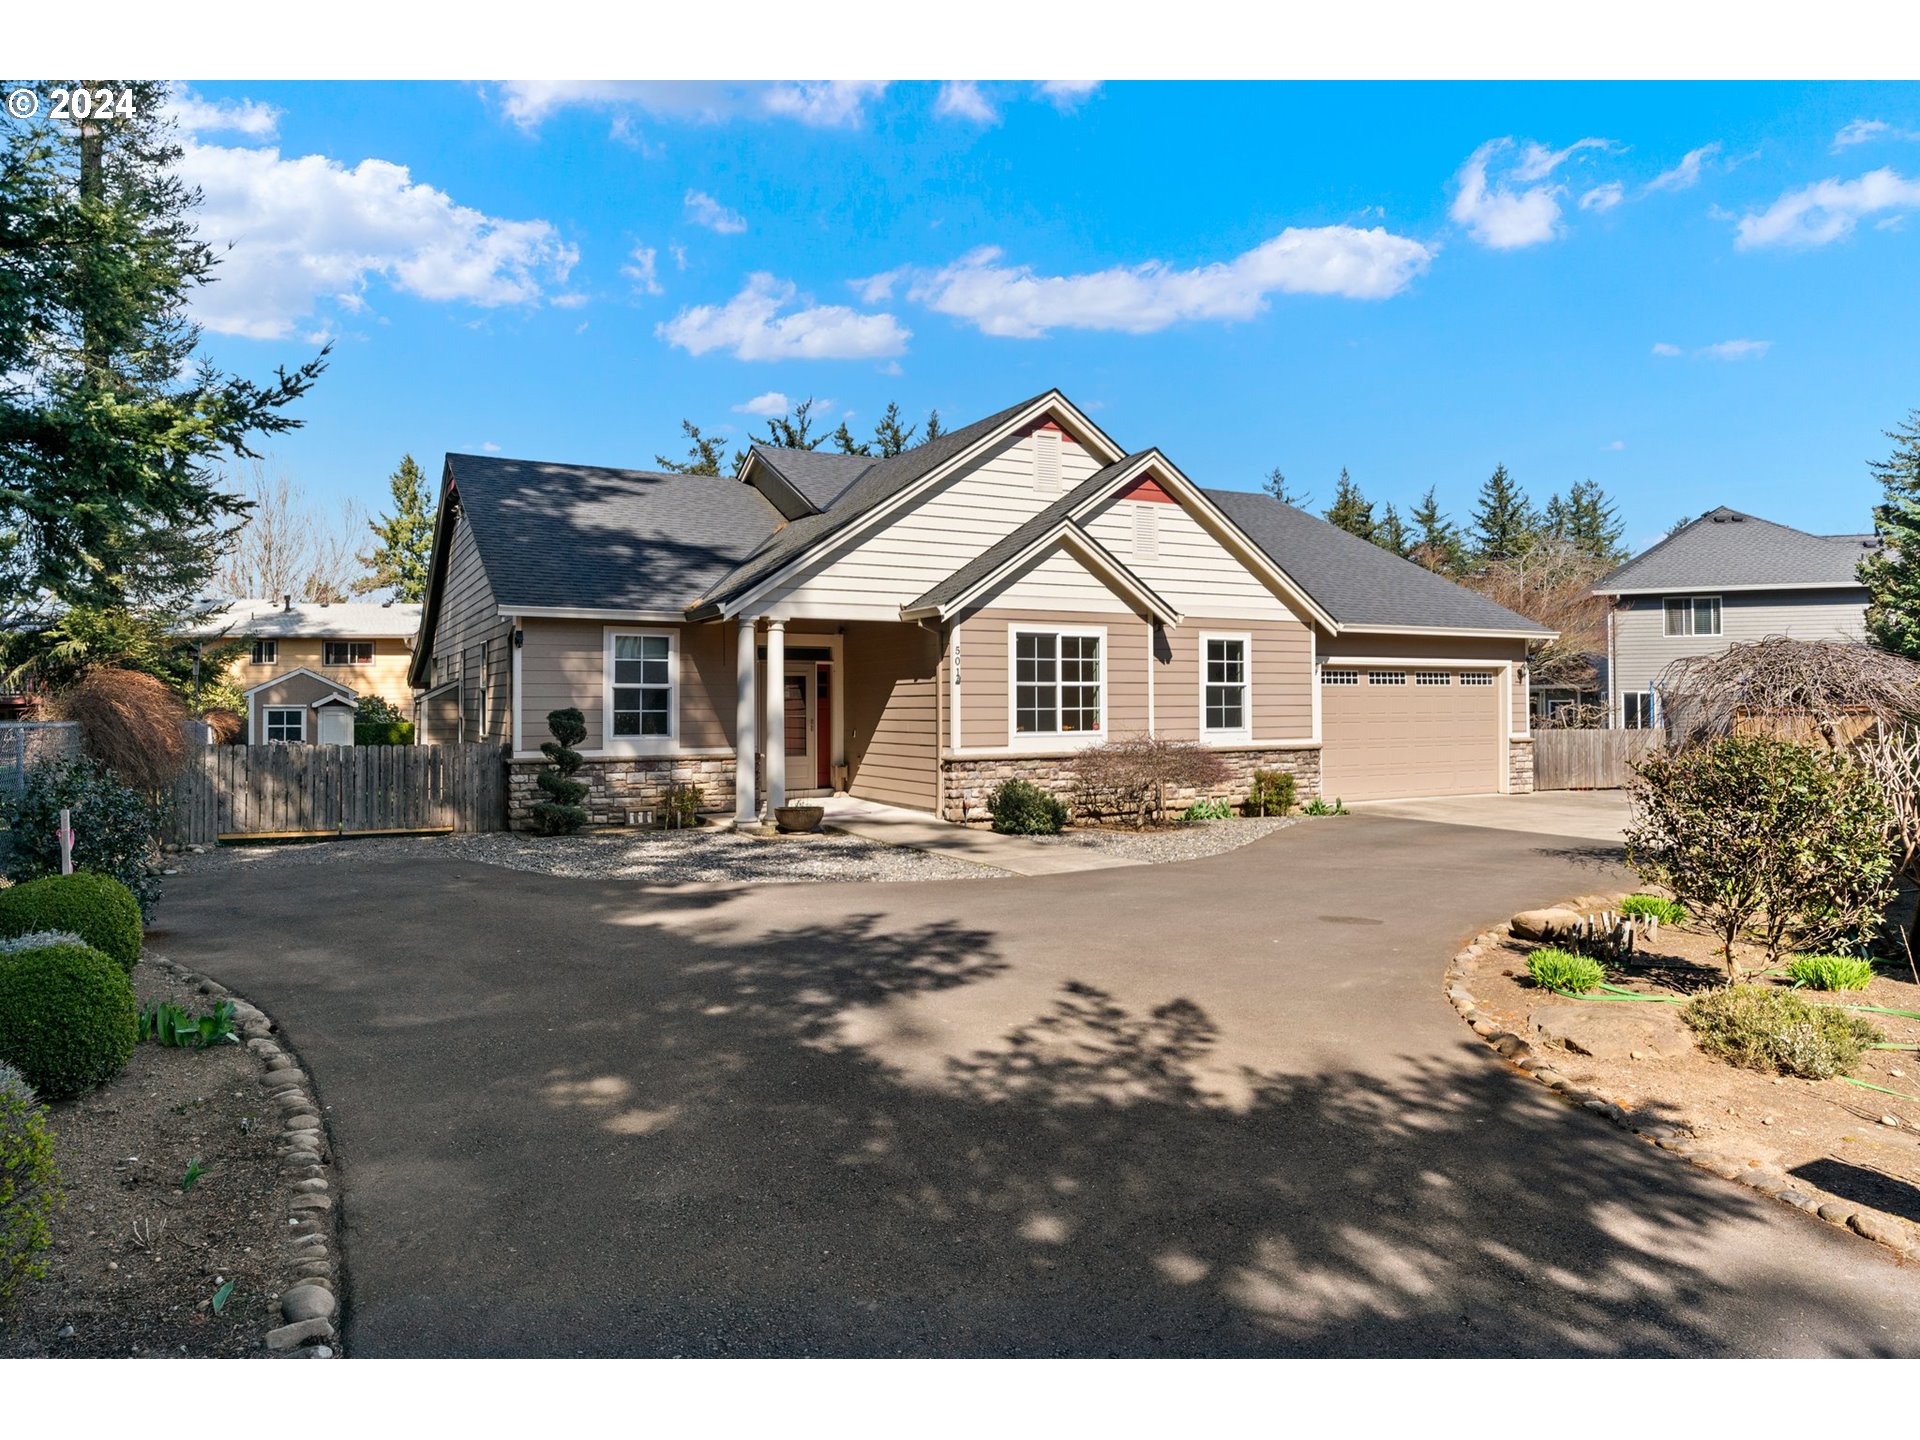 501 SW CHERRY PARK RD, Troutdale, OR 